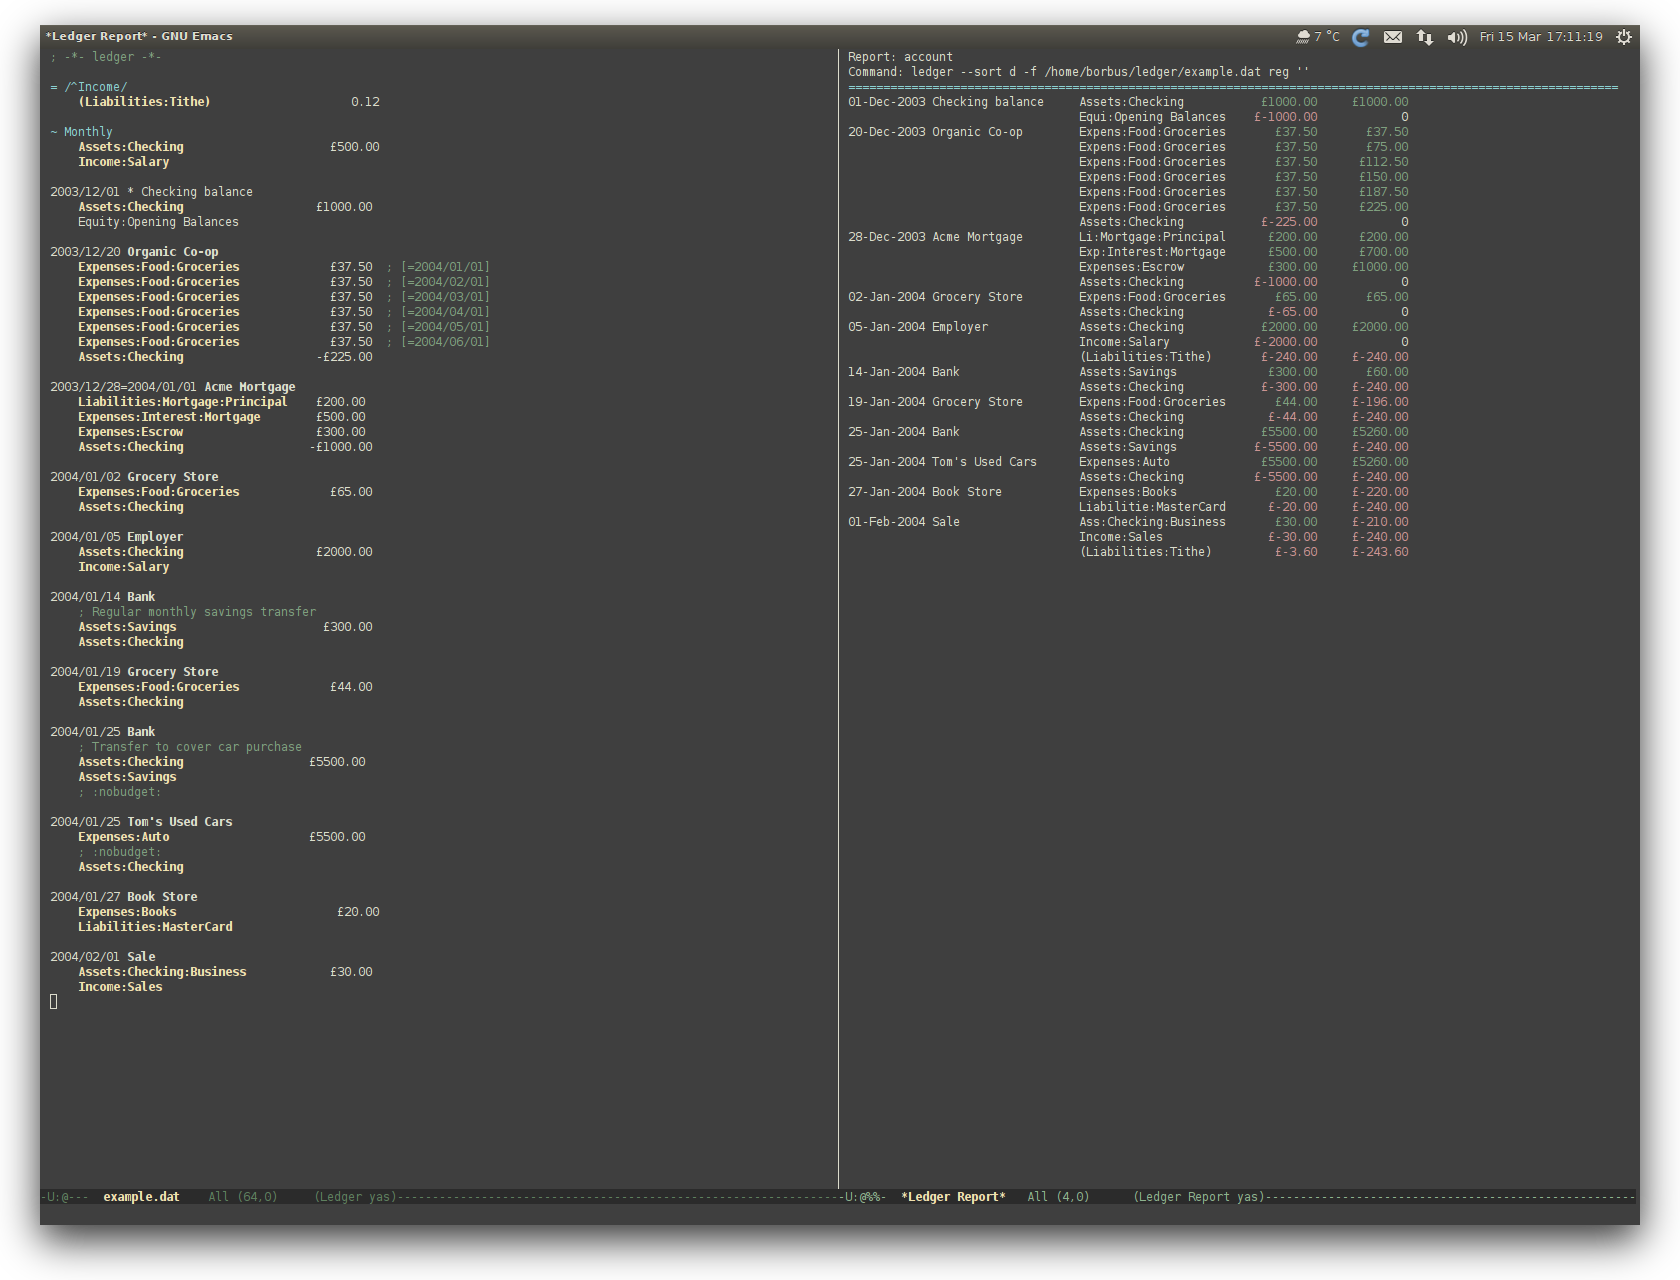 /TakeV/spacemacs/media/commit/7d2181bd47ae54cf68bb9f8bd2823a3095e763a9/layers/finance/img/ledger.png